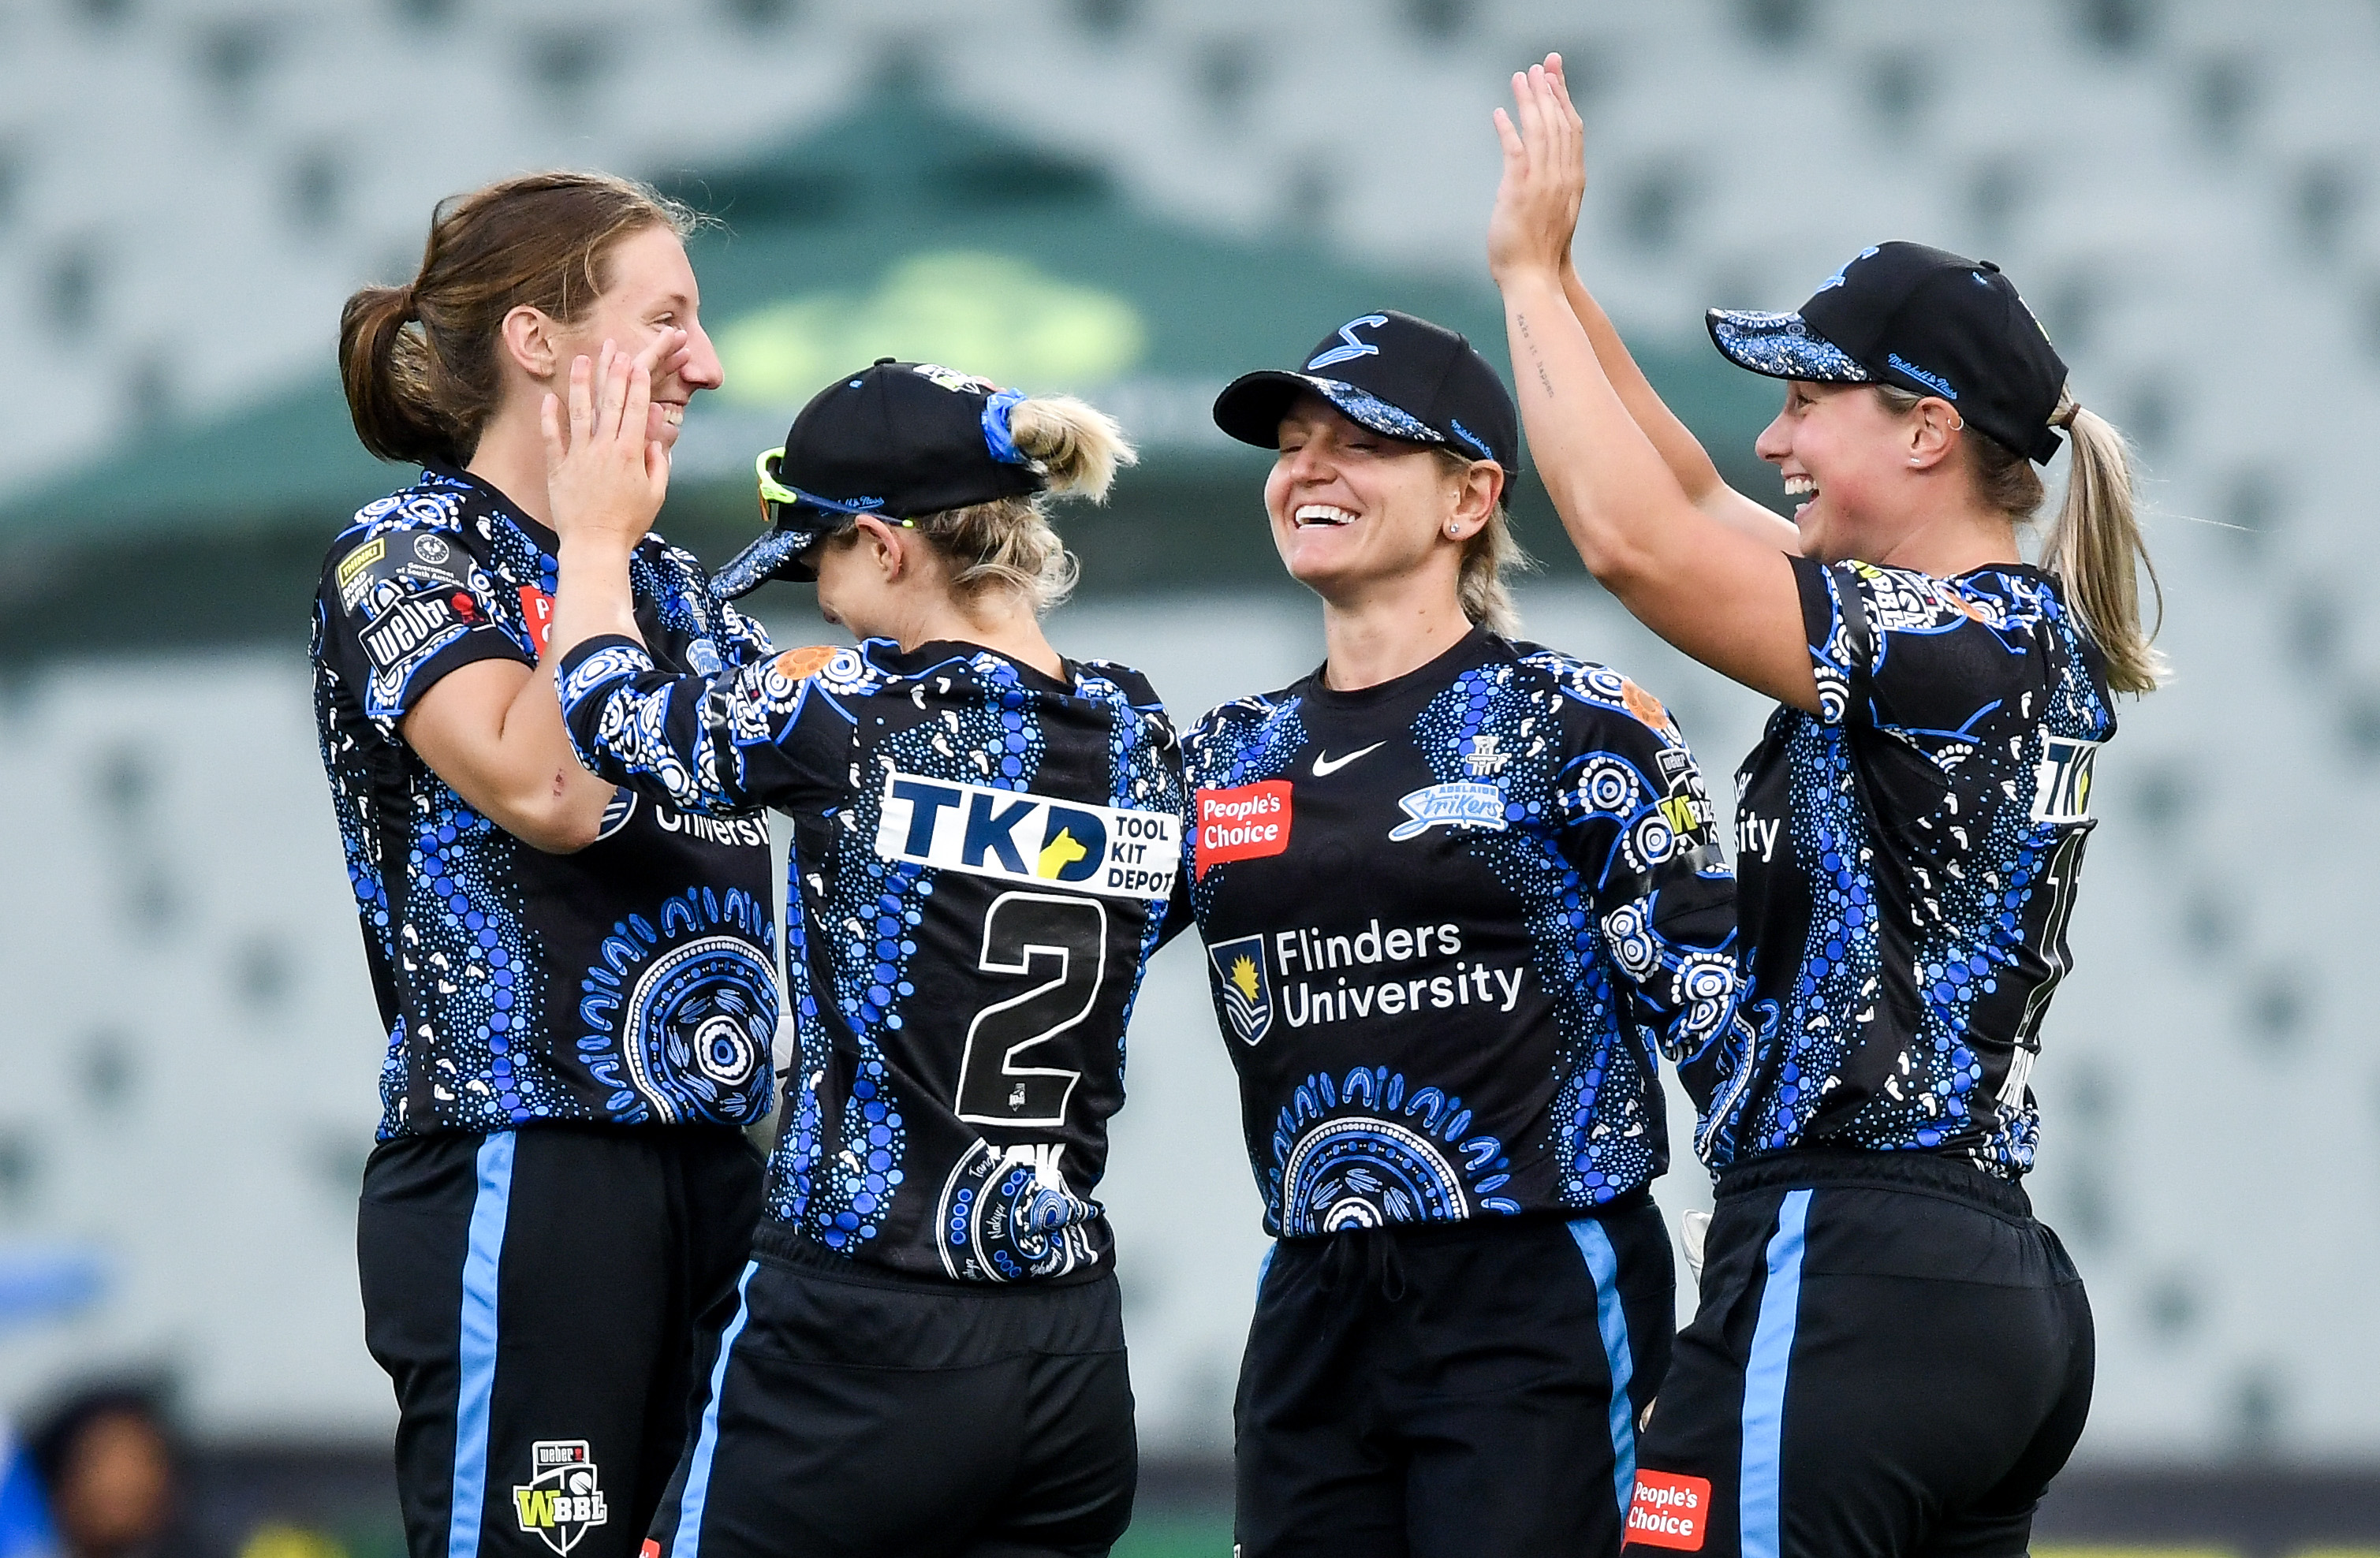 WBBL | Strikers' bowling brilliance in 5-wicket win over Perth ensures third straight finals appearance